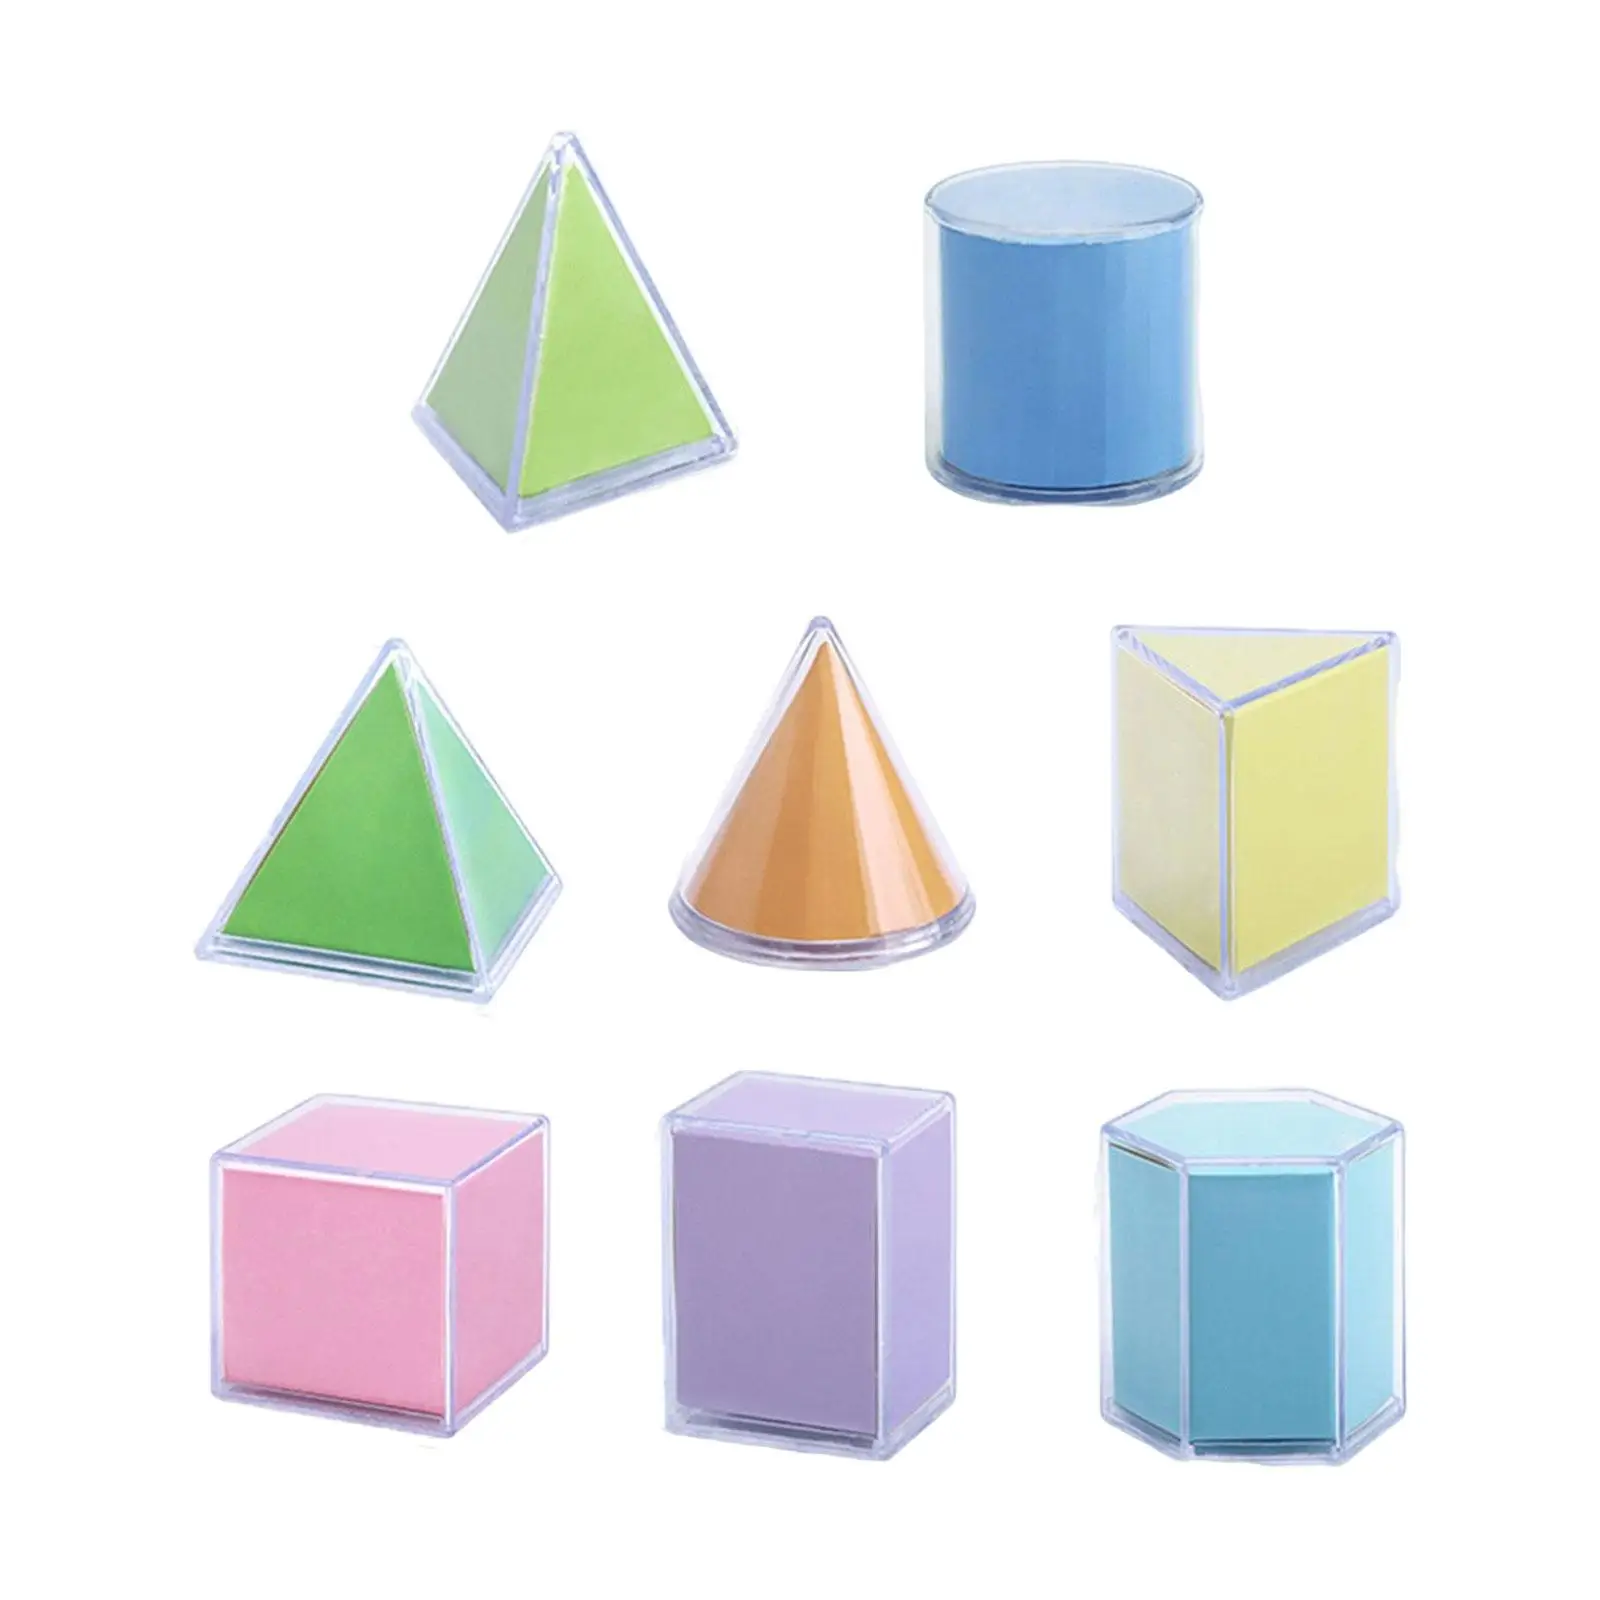 8Pcs 3D Shapes Geometric Shape Sorter Sorting Toy Stacking Game for Kids